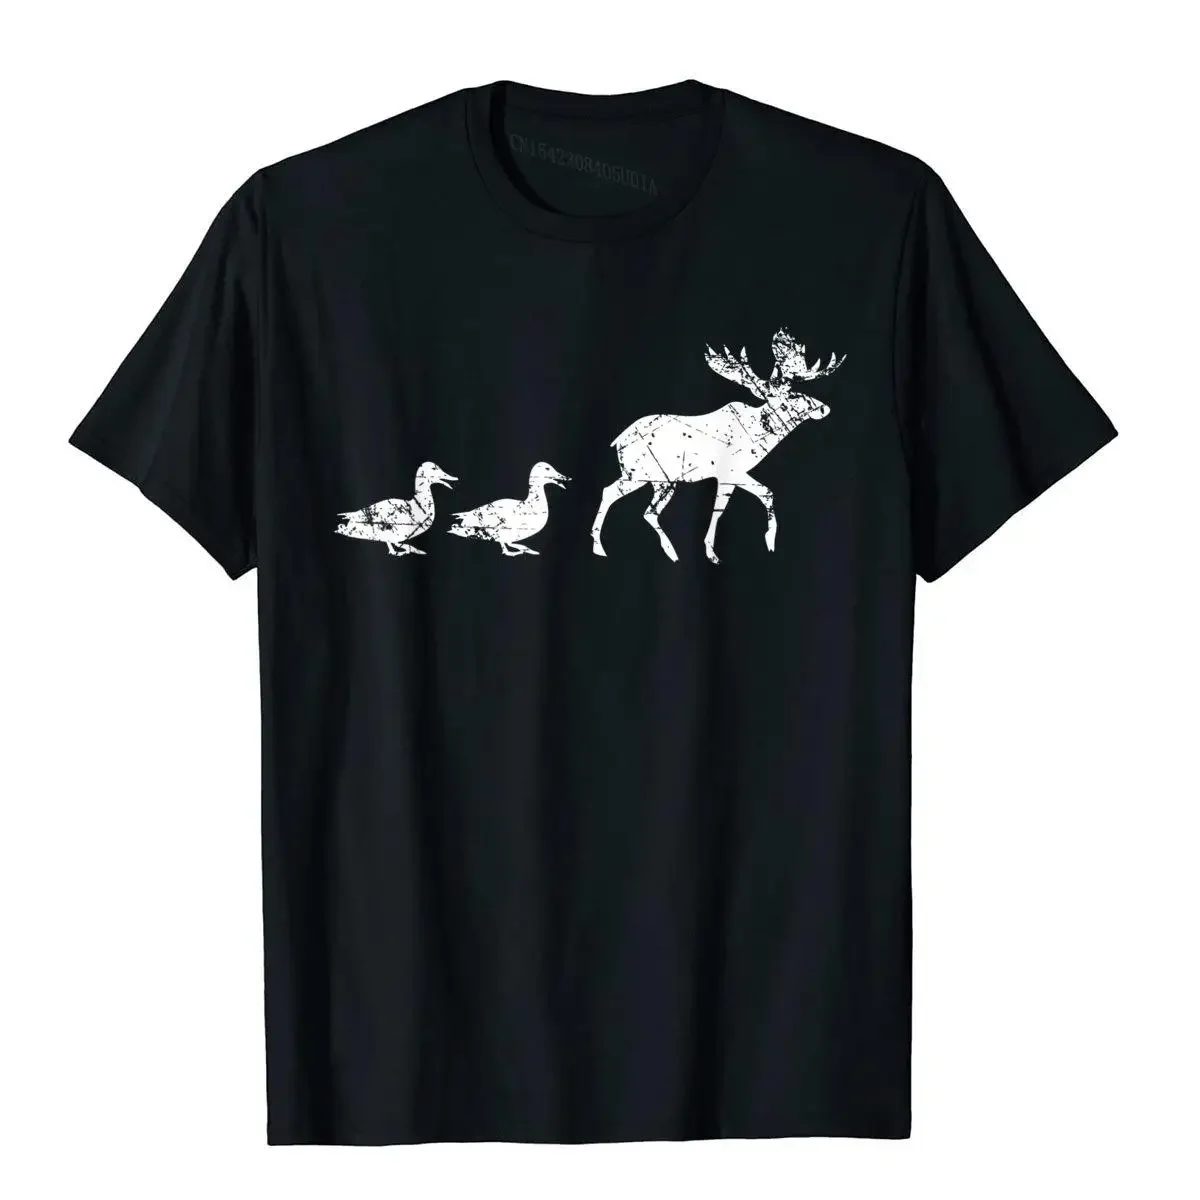 Funny Animal Pun T Shirt 2 Duck Hunting Outdoors Moose Game Cool Cotton Mens Tops Shirt Outdoor New Coming T Shirt